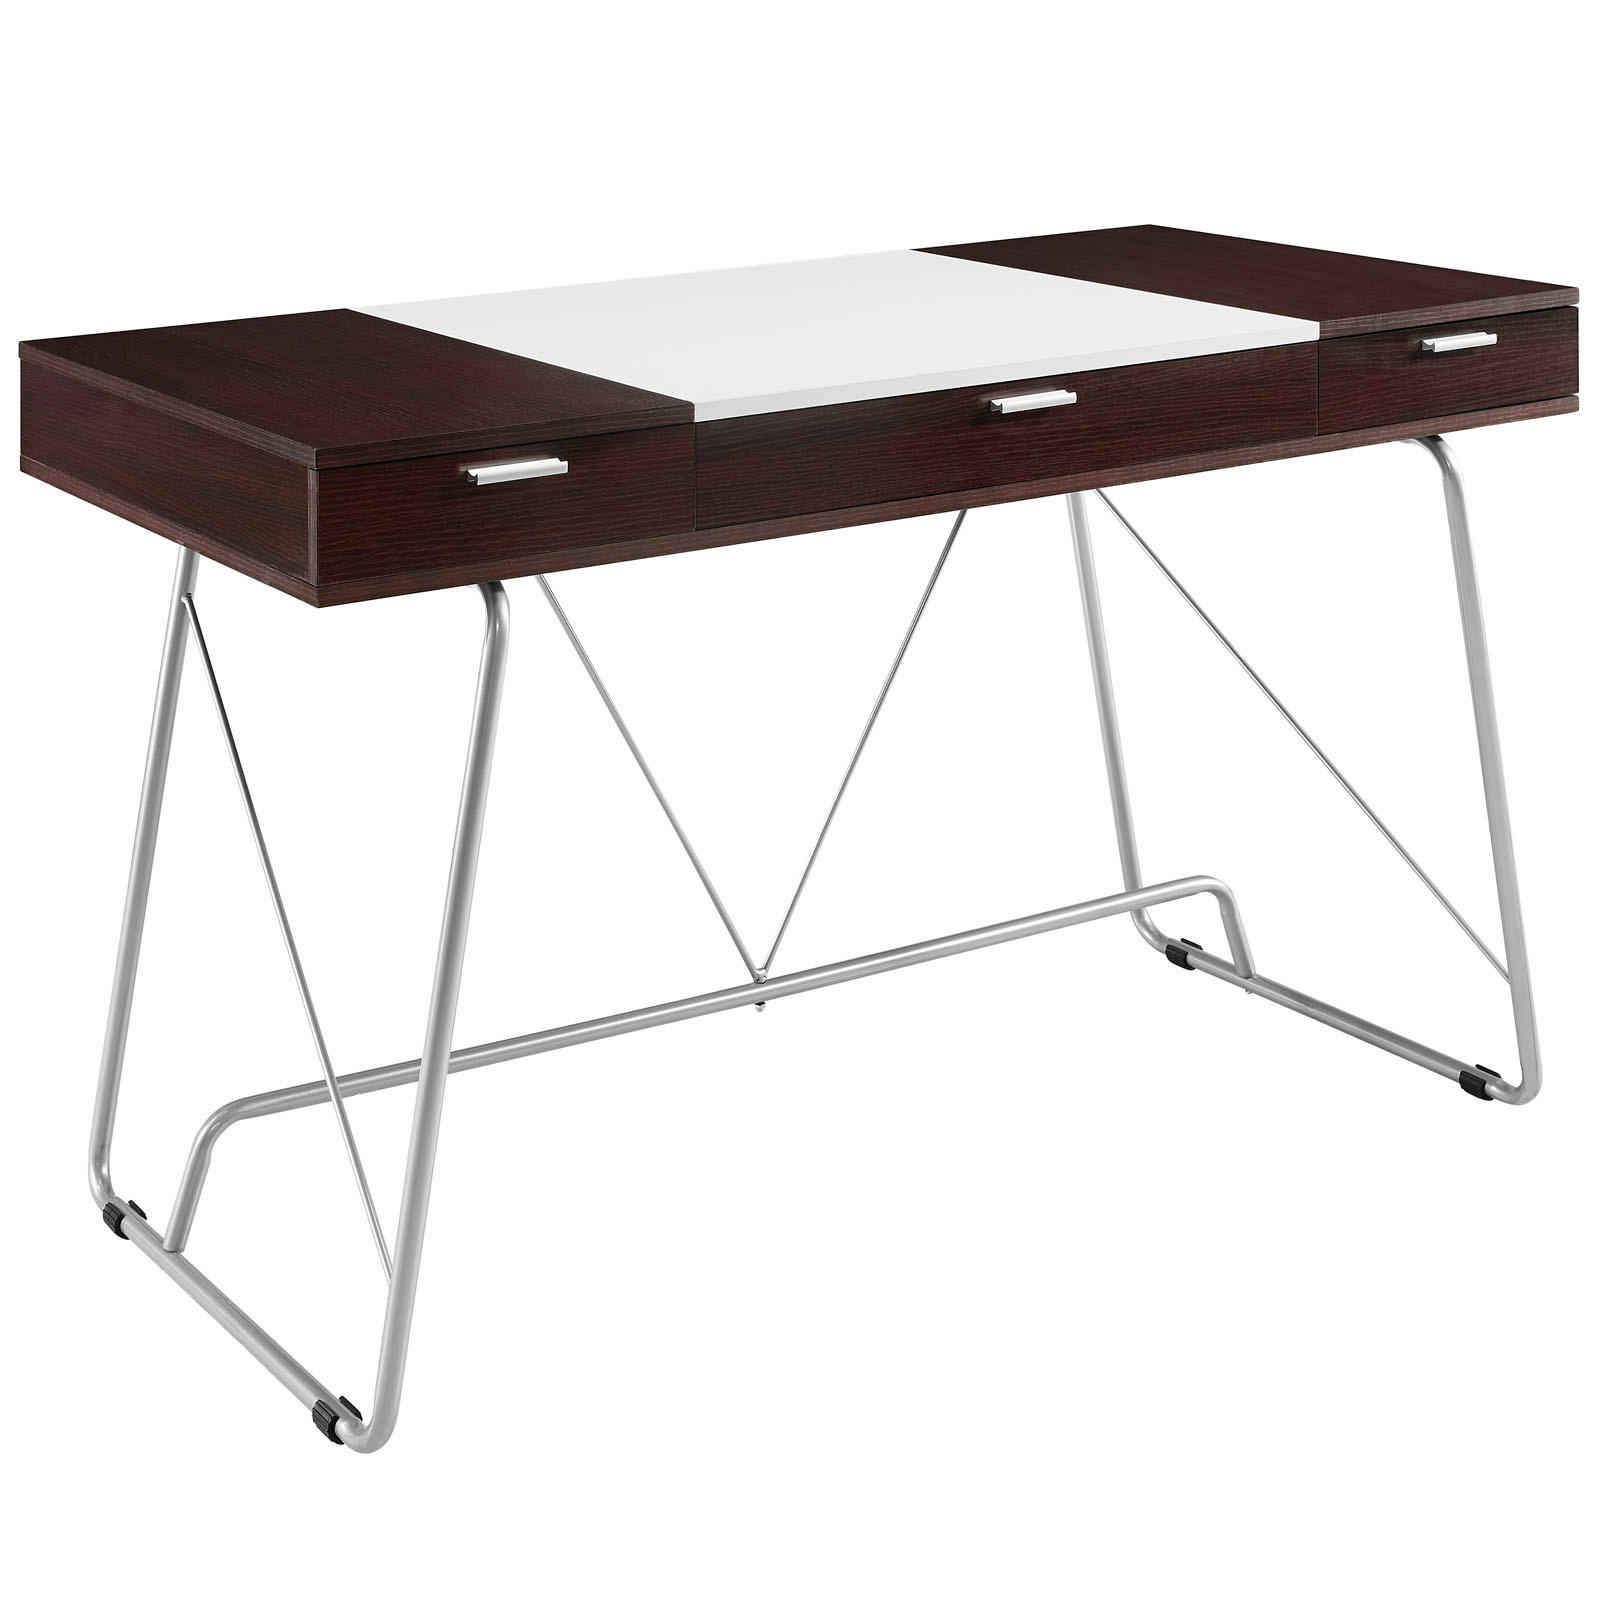 Space saving desk from Modway - Shown in Cherry (Brown)